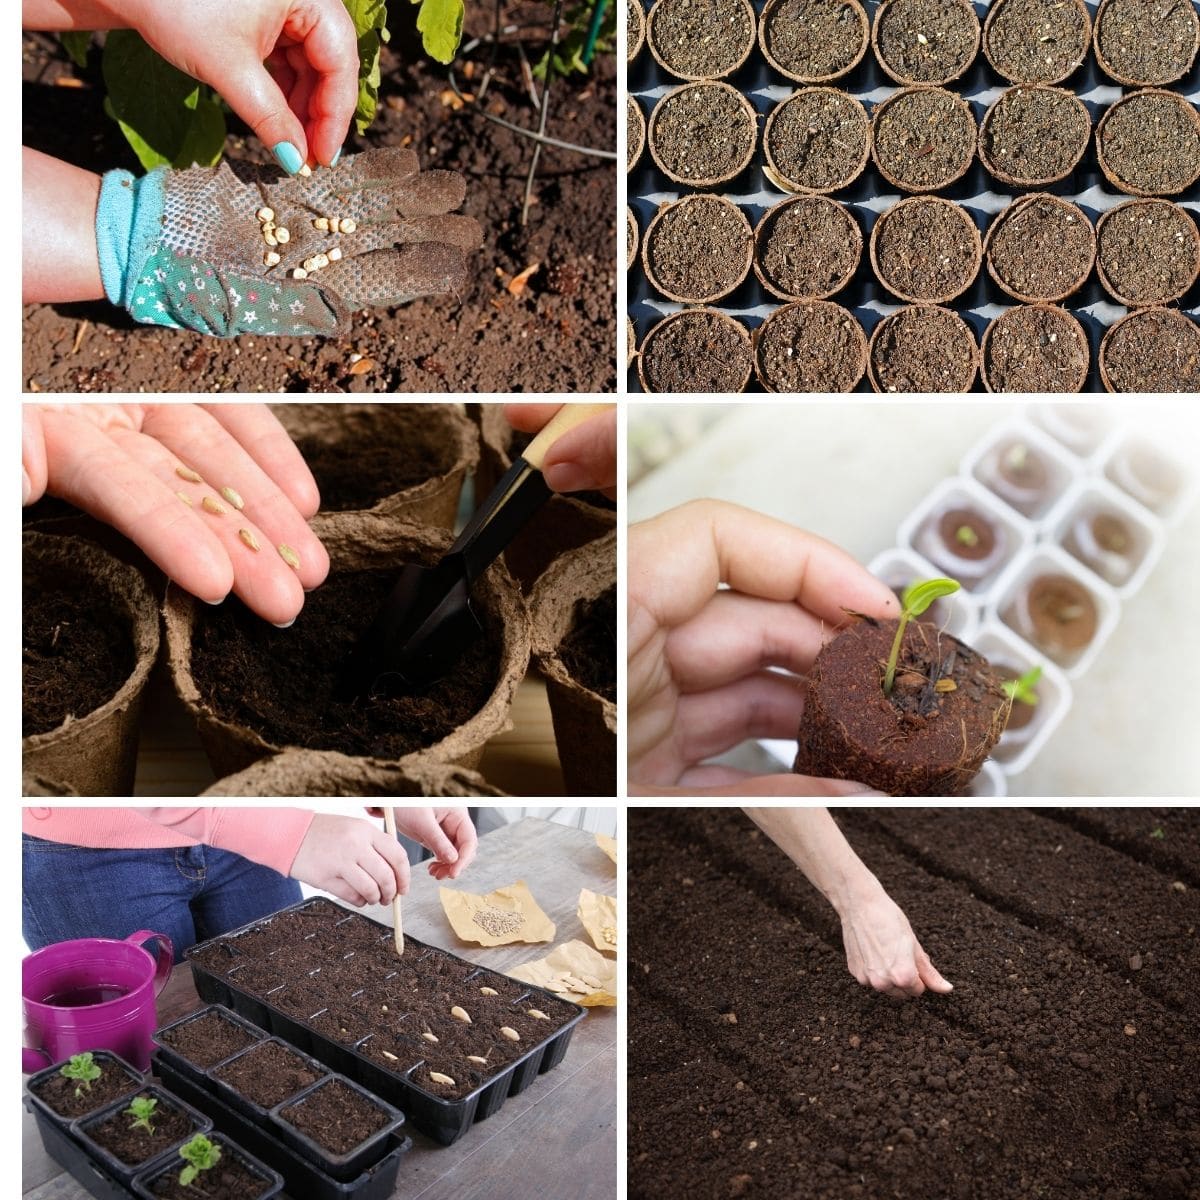 Photo collage featuring germination process from the article.